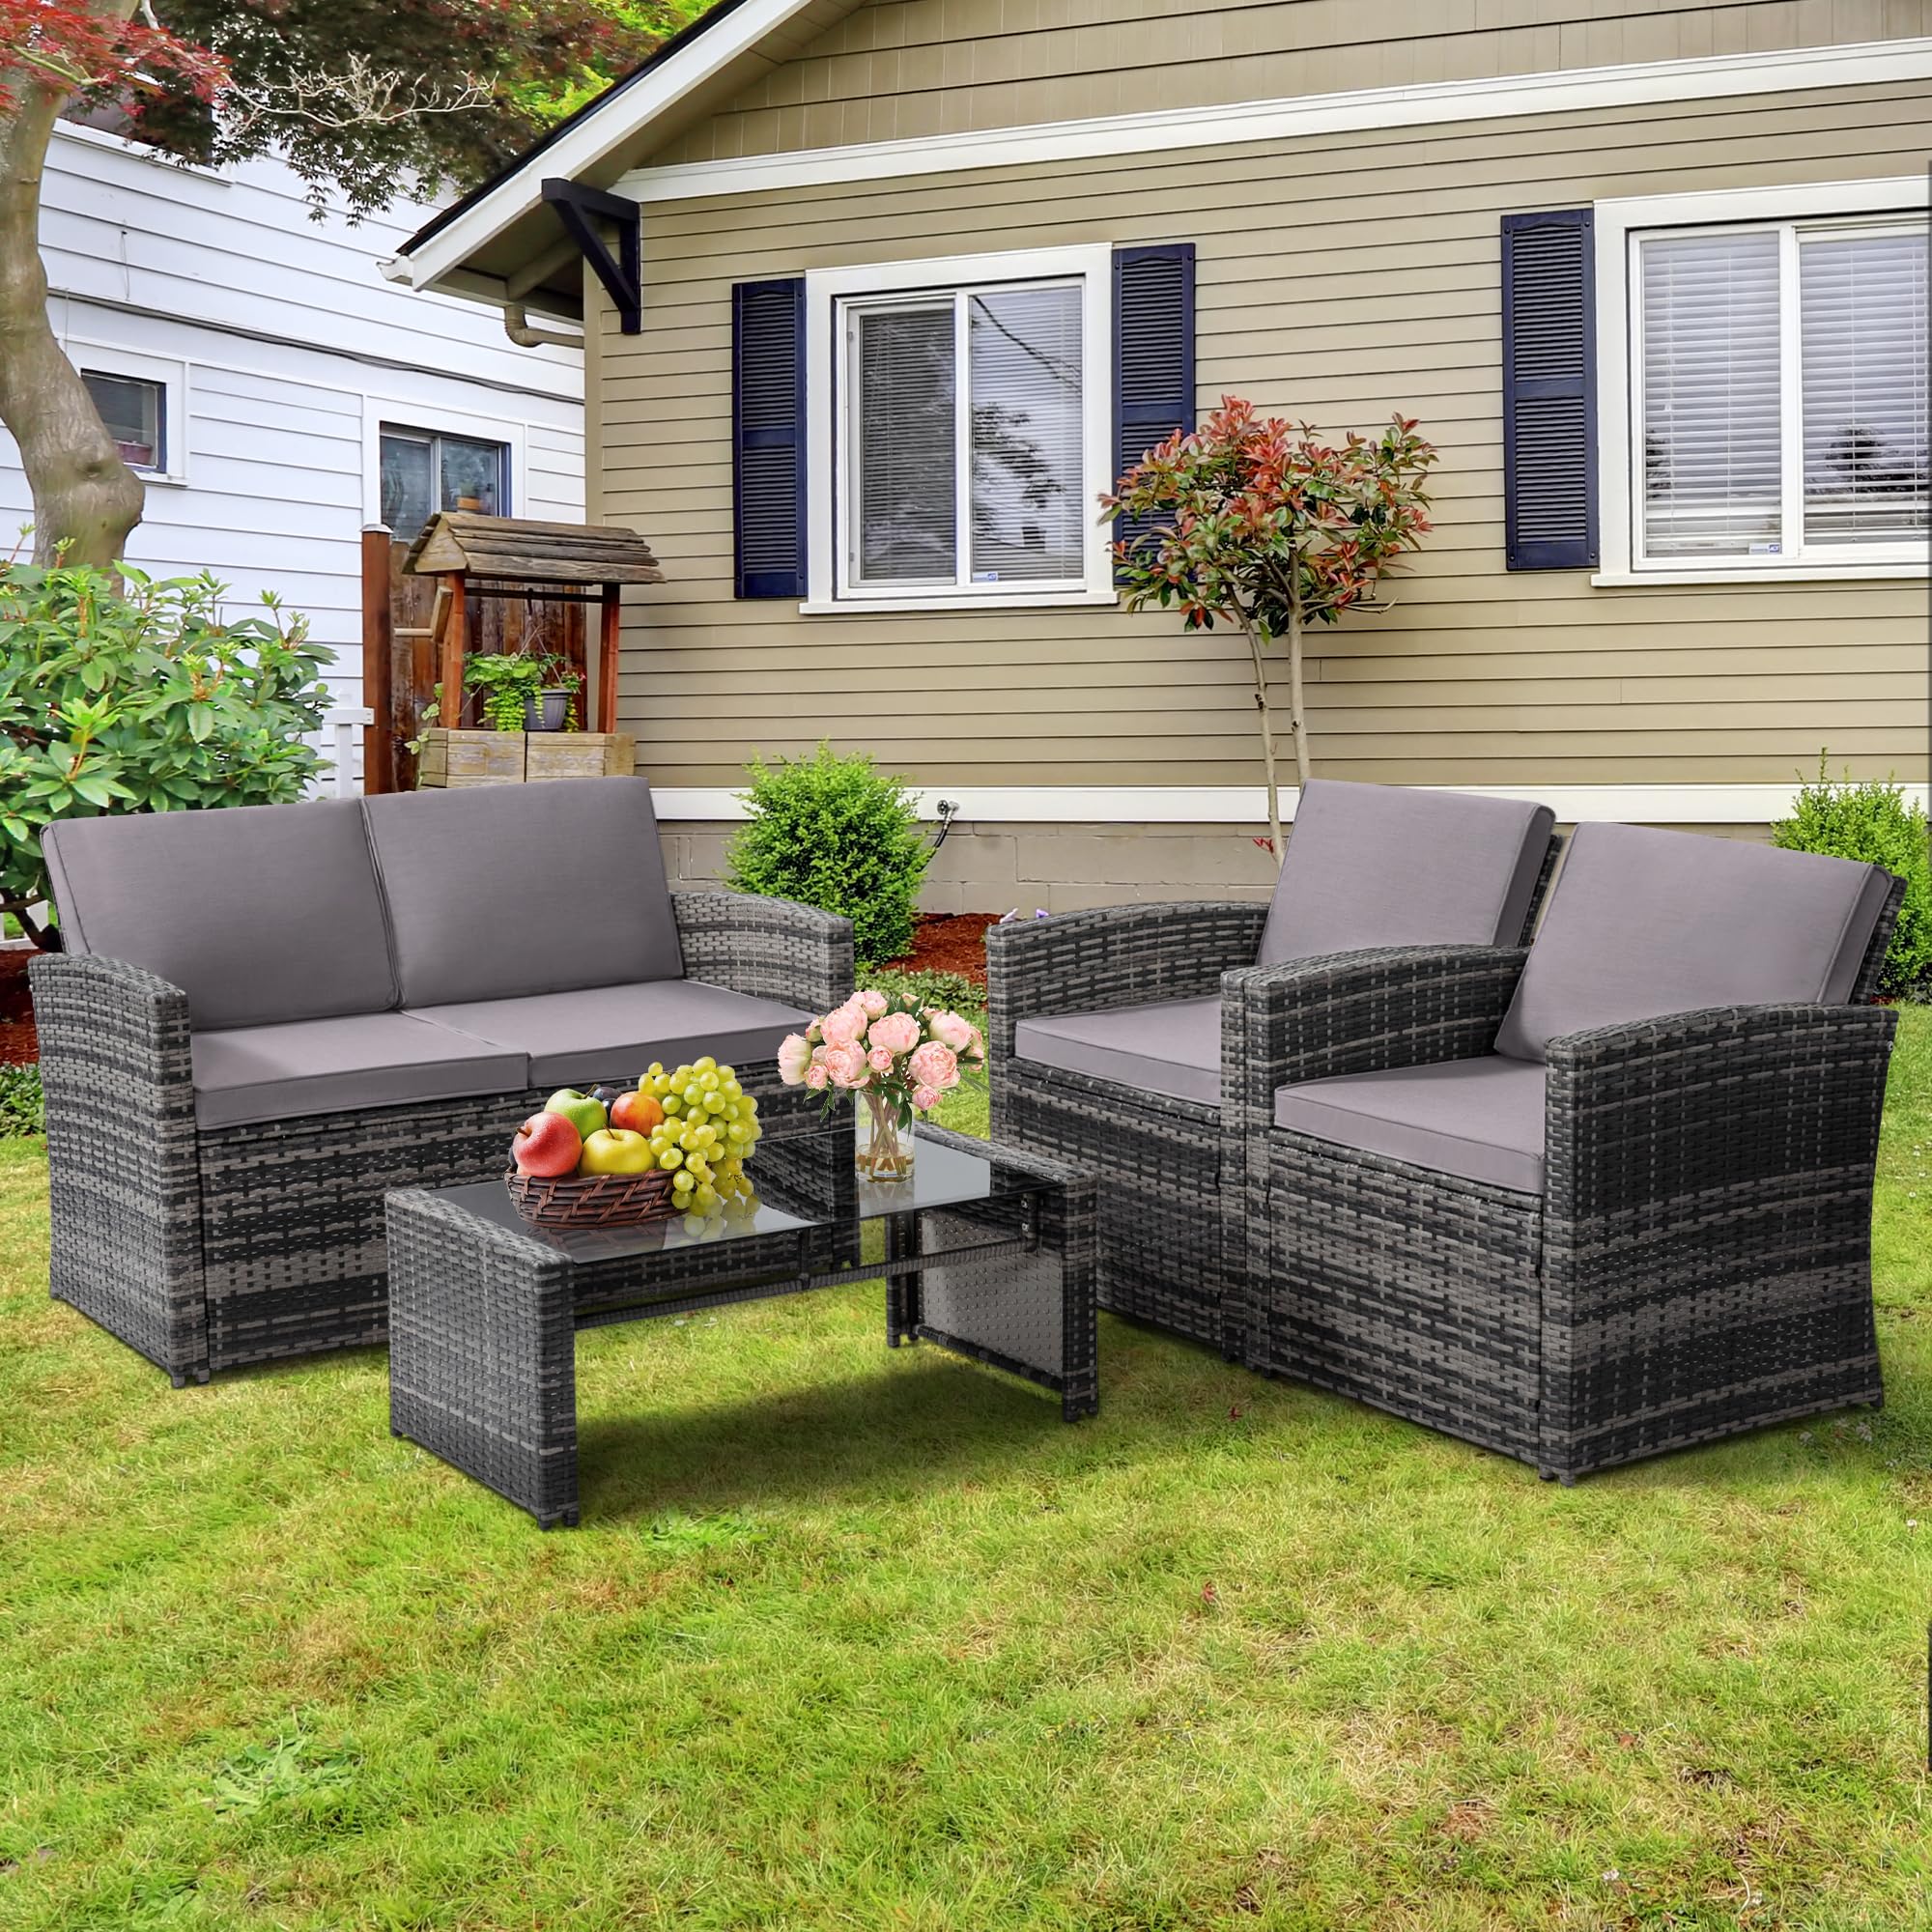 KROFEM 4 Pieces Patio Conversation Set, Outside Rattan Sectional Sofa, Cushioned Furniture Set, Wicker Sofa Ideal for Garden, Porch, Backyard, Grey Color Rattan and Light Grey Cushion